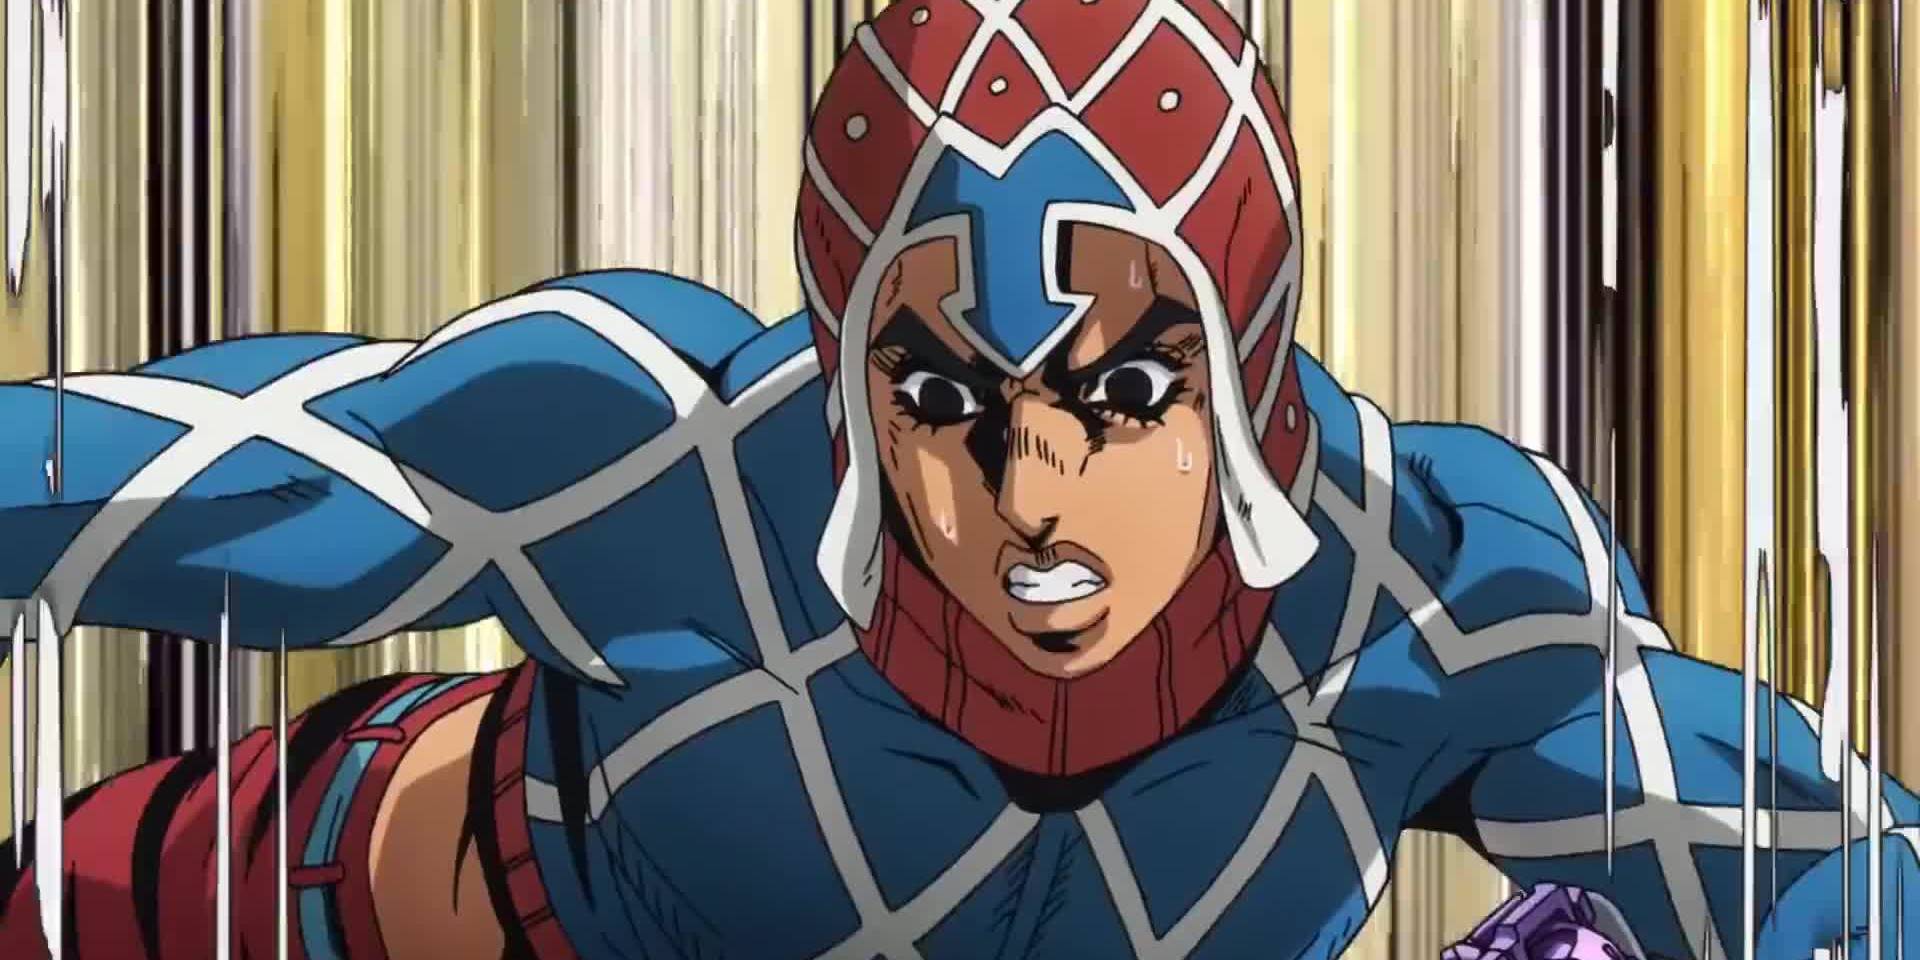 How old is guido mista